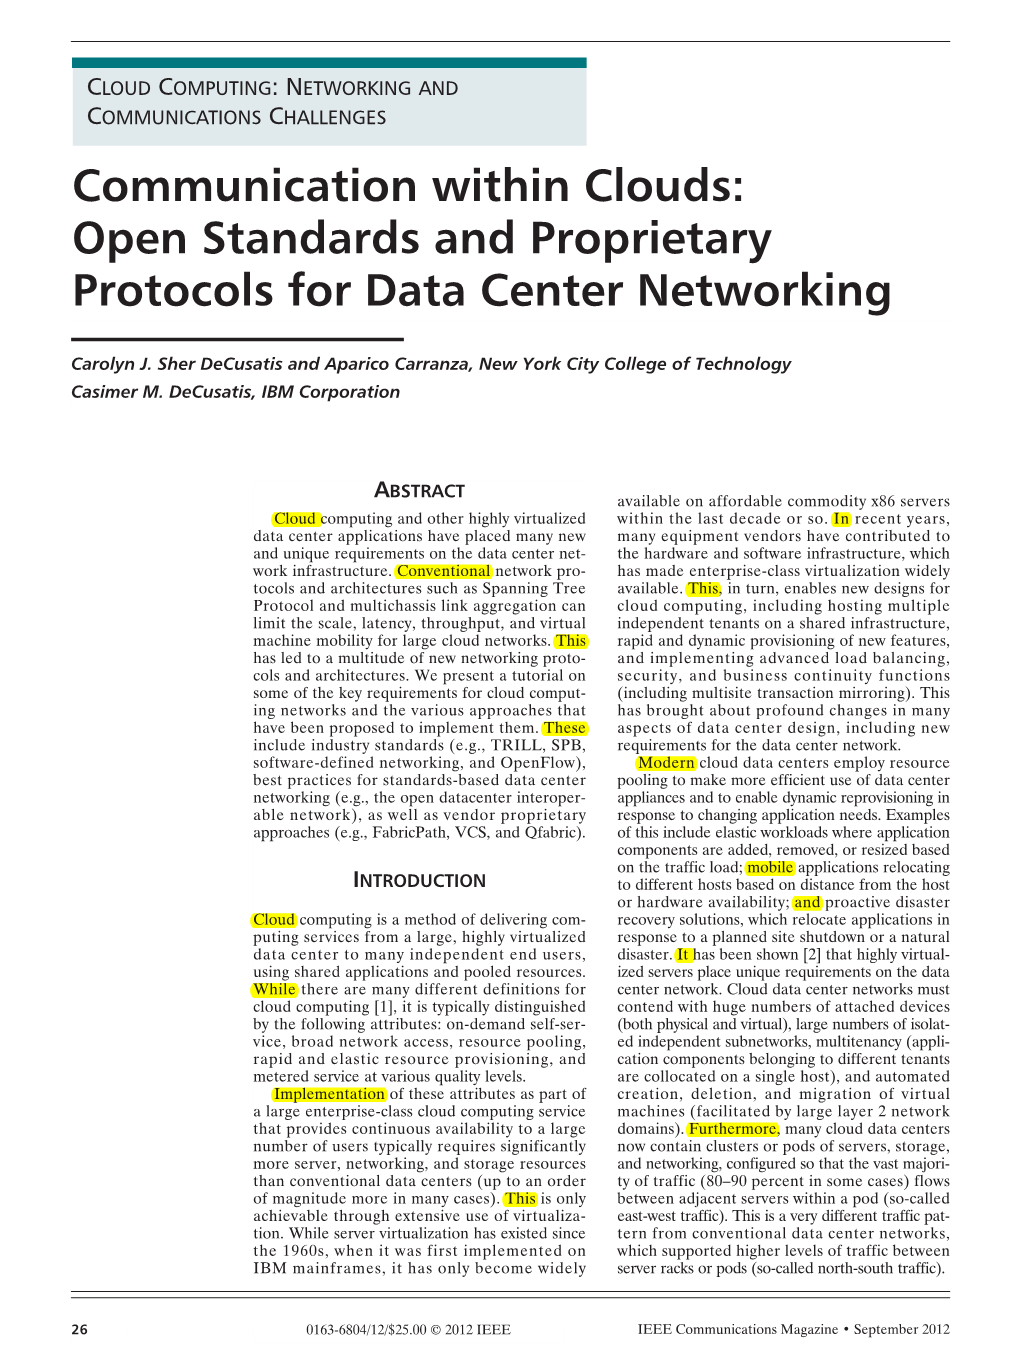 Open Standards and Proprietary Protocols for Data Center Networking